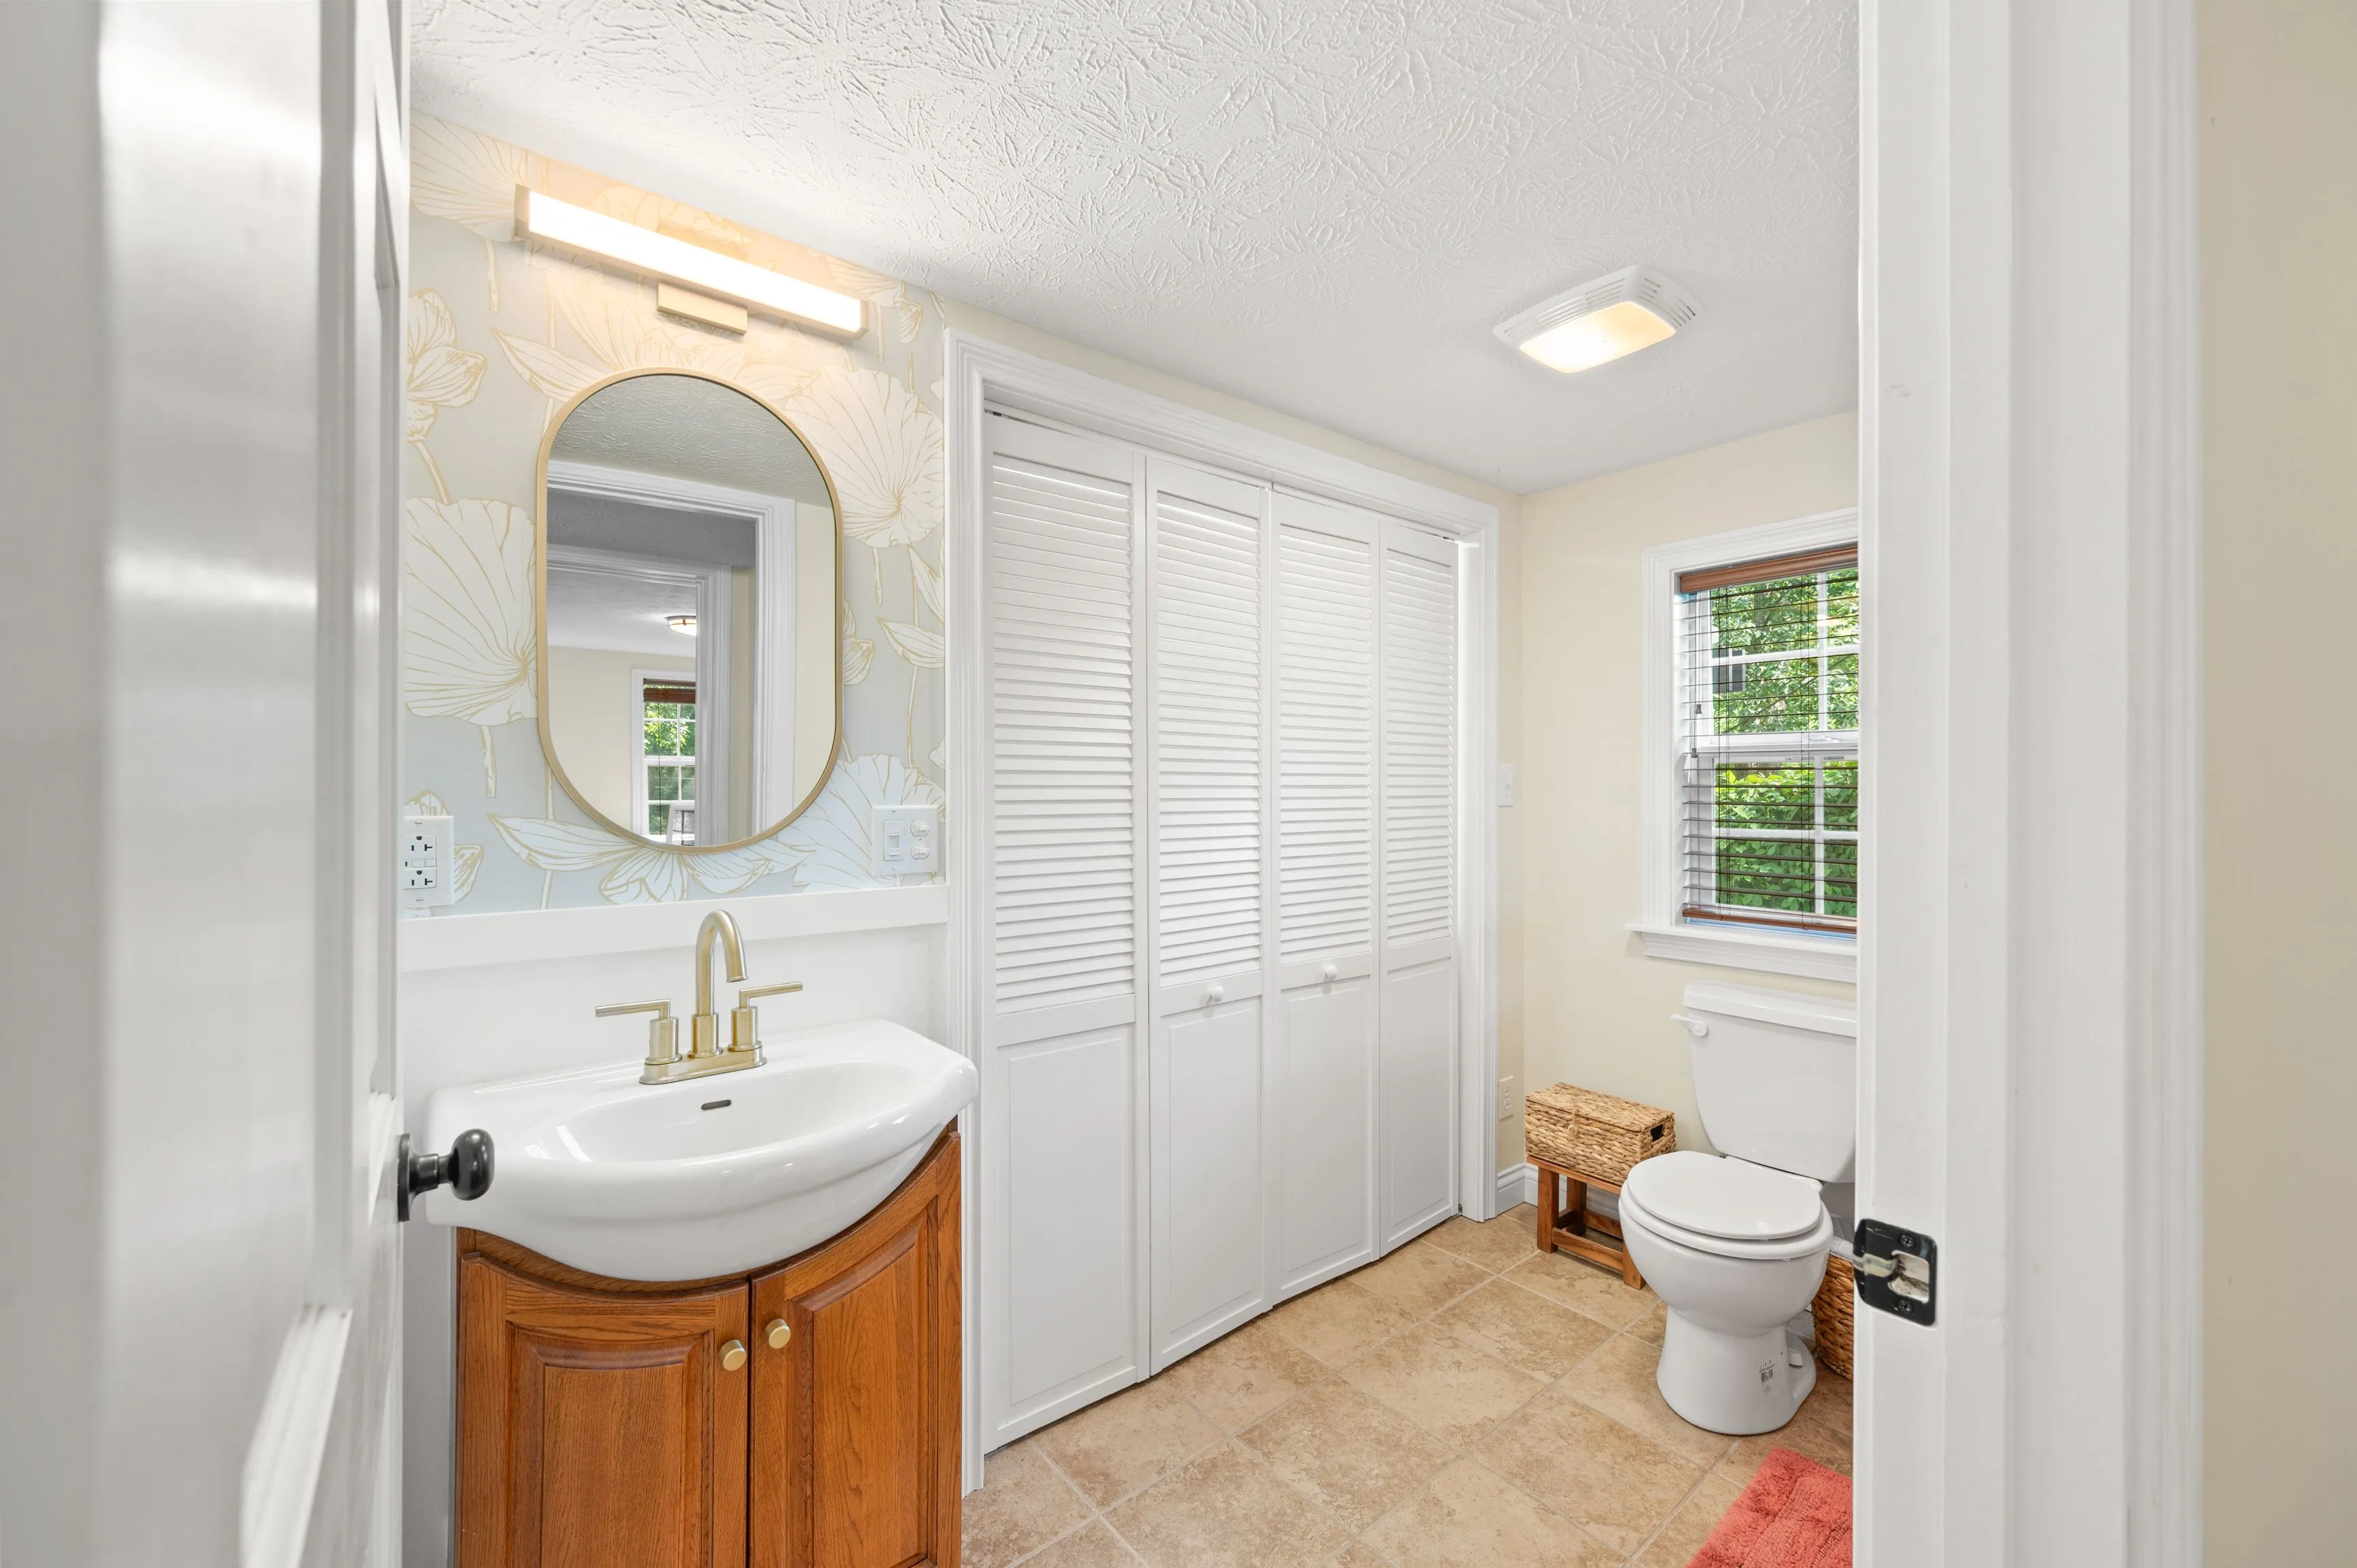 Bright, compact bathroom with white walls, a vanity with a wood cabinet, oval mirror, bathtub with a white shower curtain, and a toilet next to a window with a view of greenery.